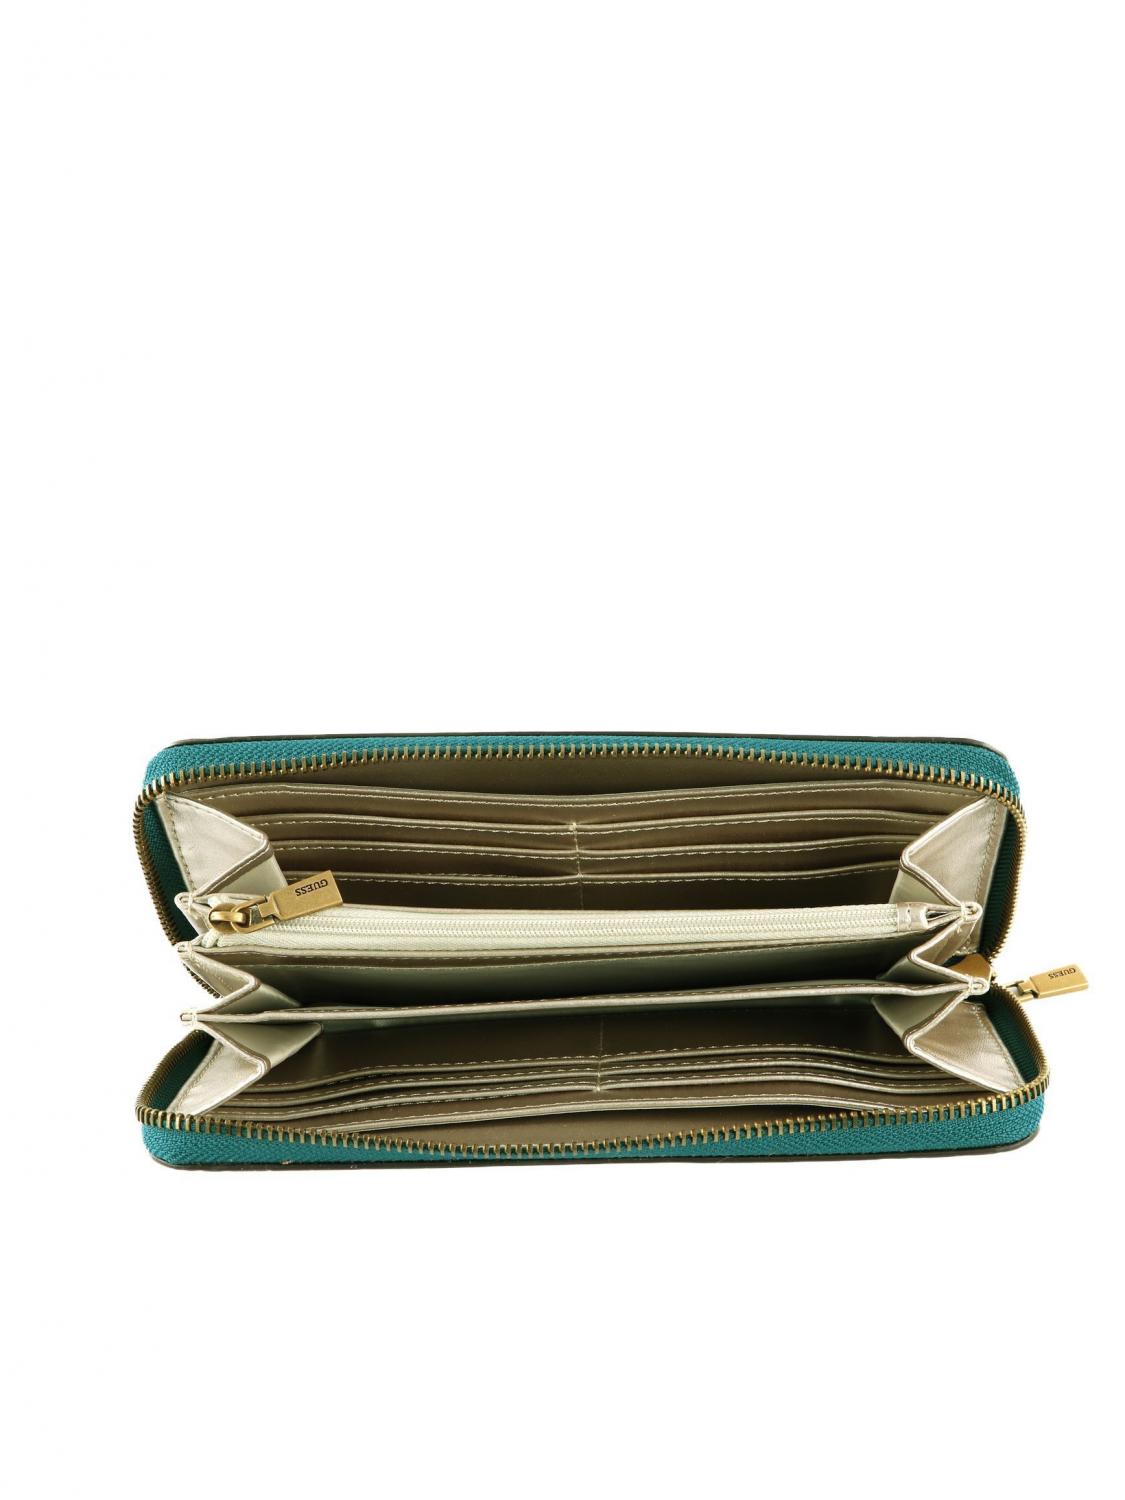 Guess Laurel Large Ziparound Wallet Deep Teal - Buy At Outlet Prices!